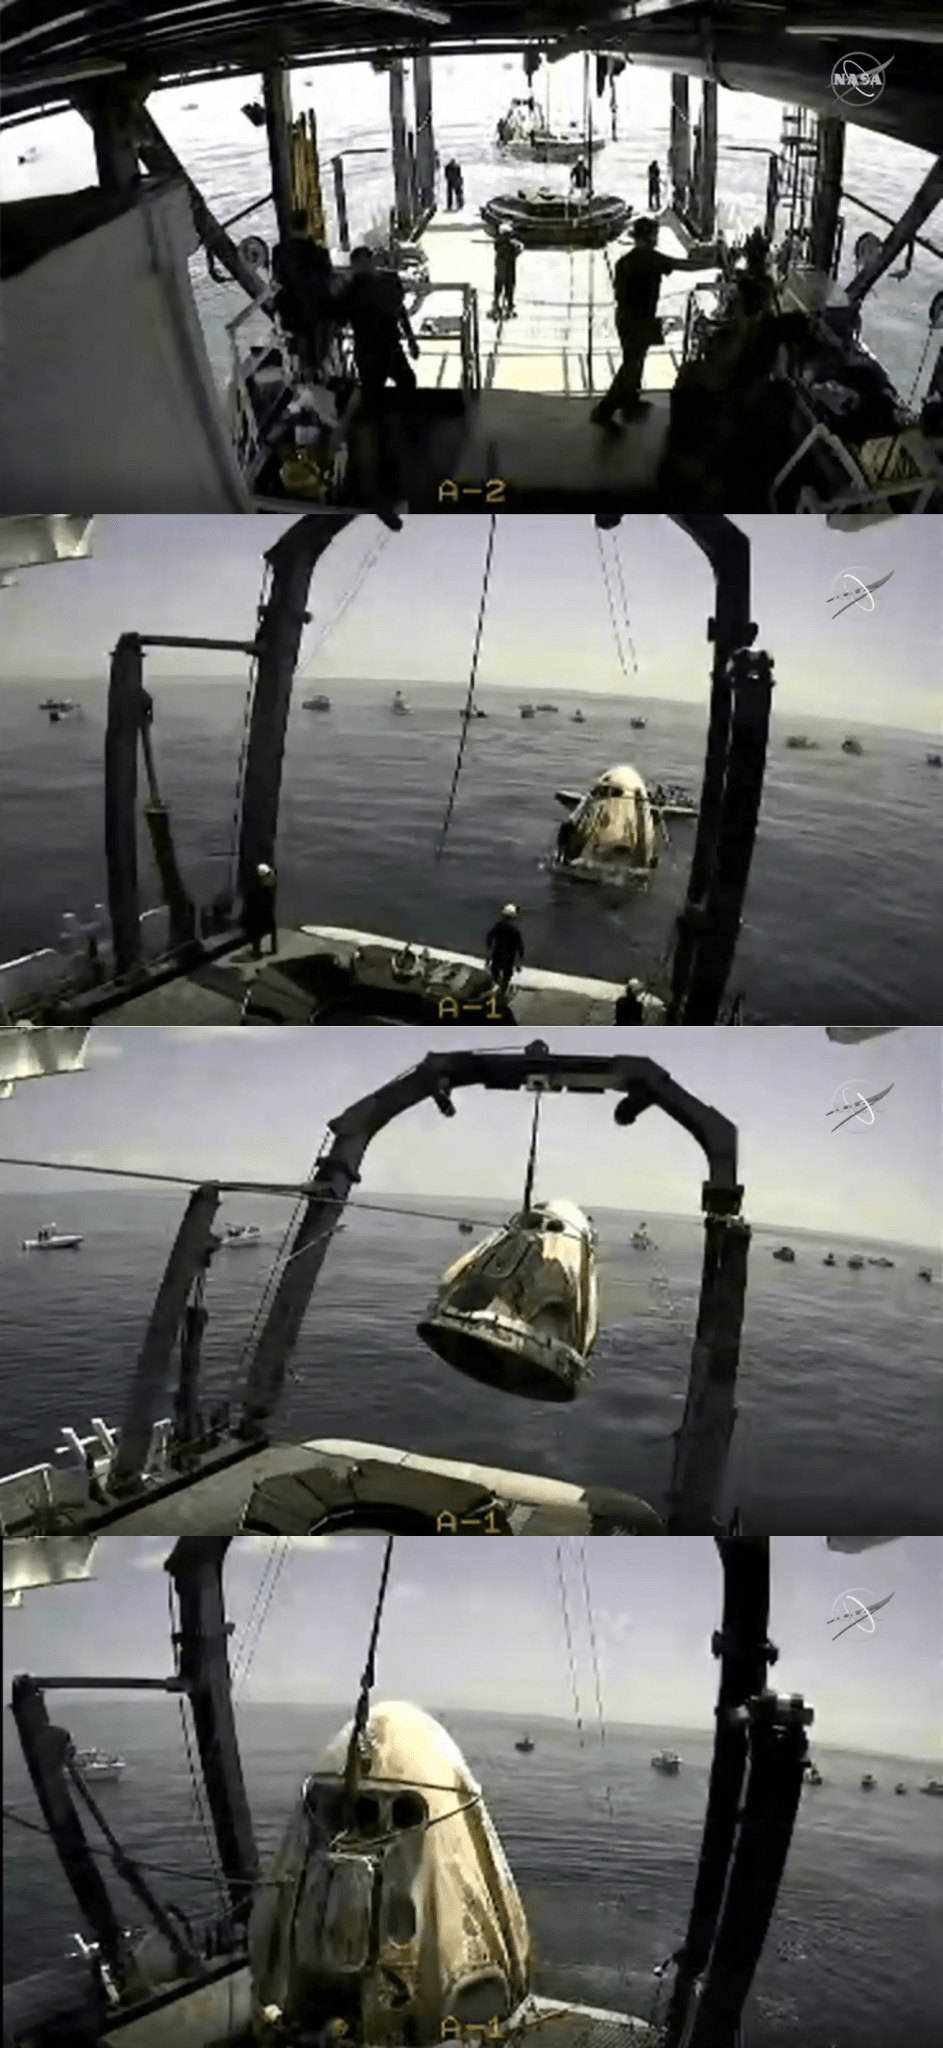 SpaceX’s Crew Dragon splashes down in the Gulf of Mexico off the coast of Pensacola, Florida at 2:48 p.m. EDT Aug. 2, 2020.